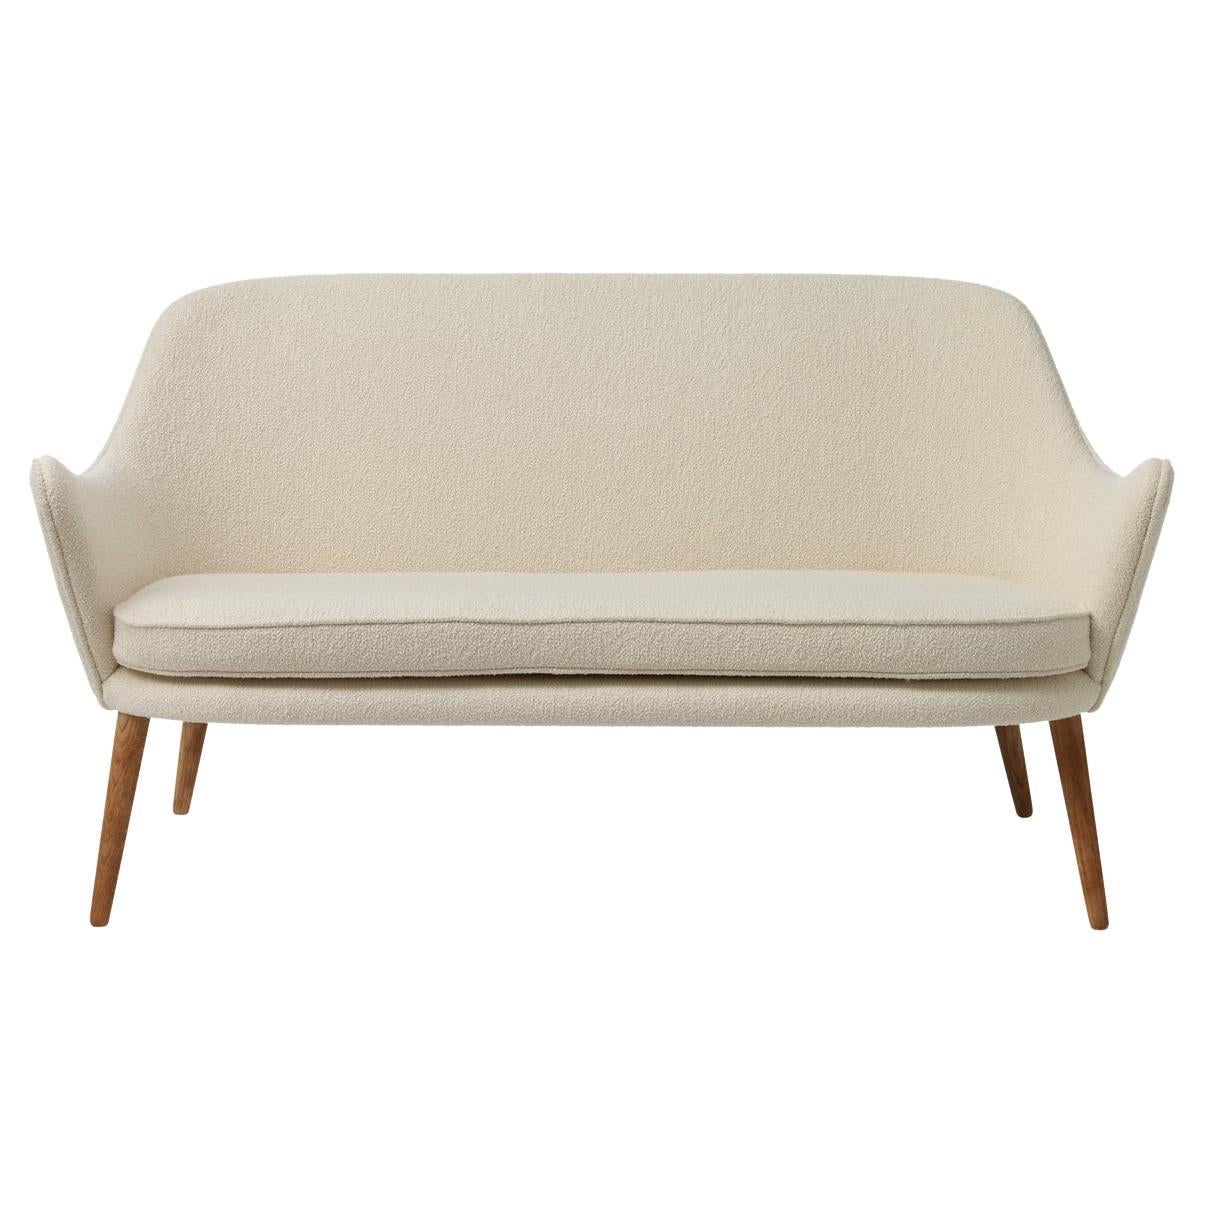 Dwell 2 Seater Cream by Warm Nordic For Sale